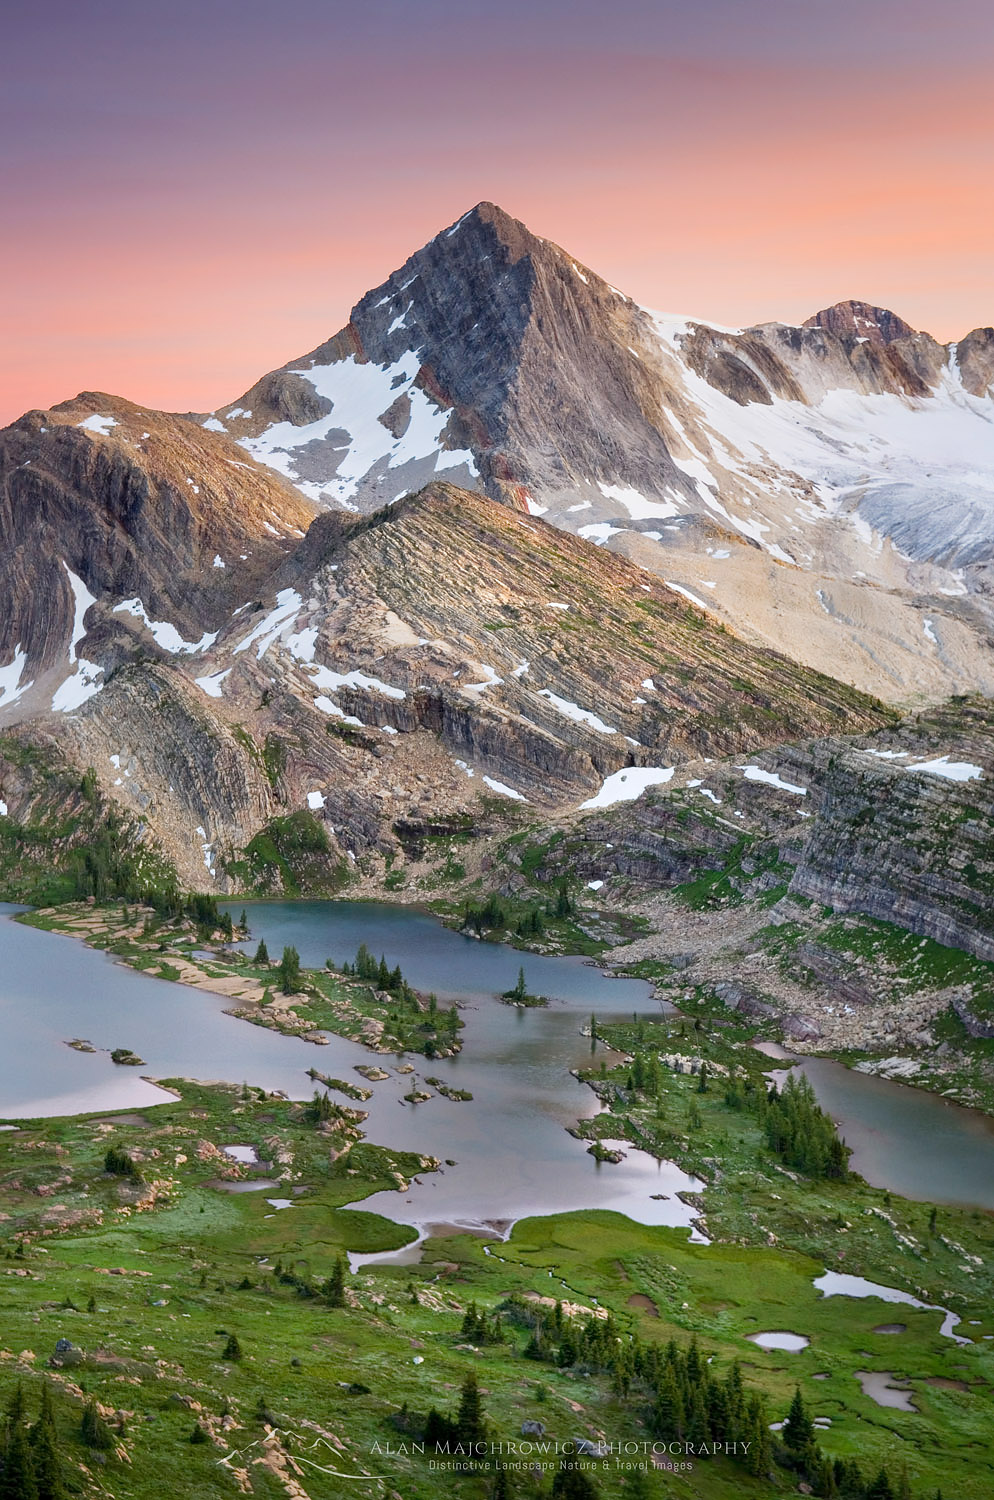 Alpenglow over Russell Peak and Limestone Lakes Basin, Height-of-the-Rockies Provincial Park British Columbia Canada #46245